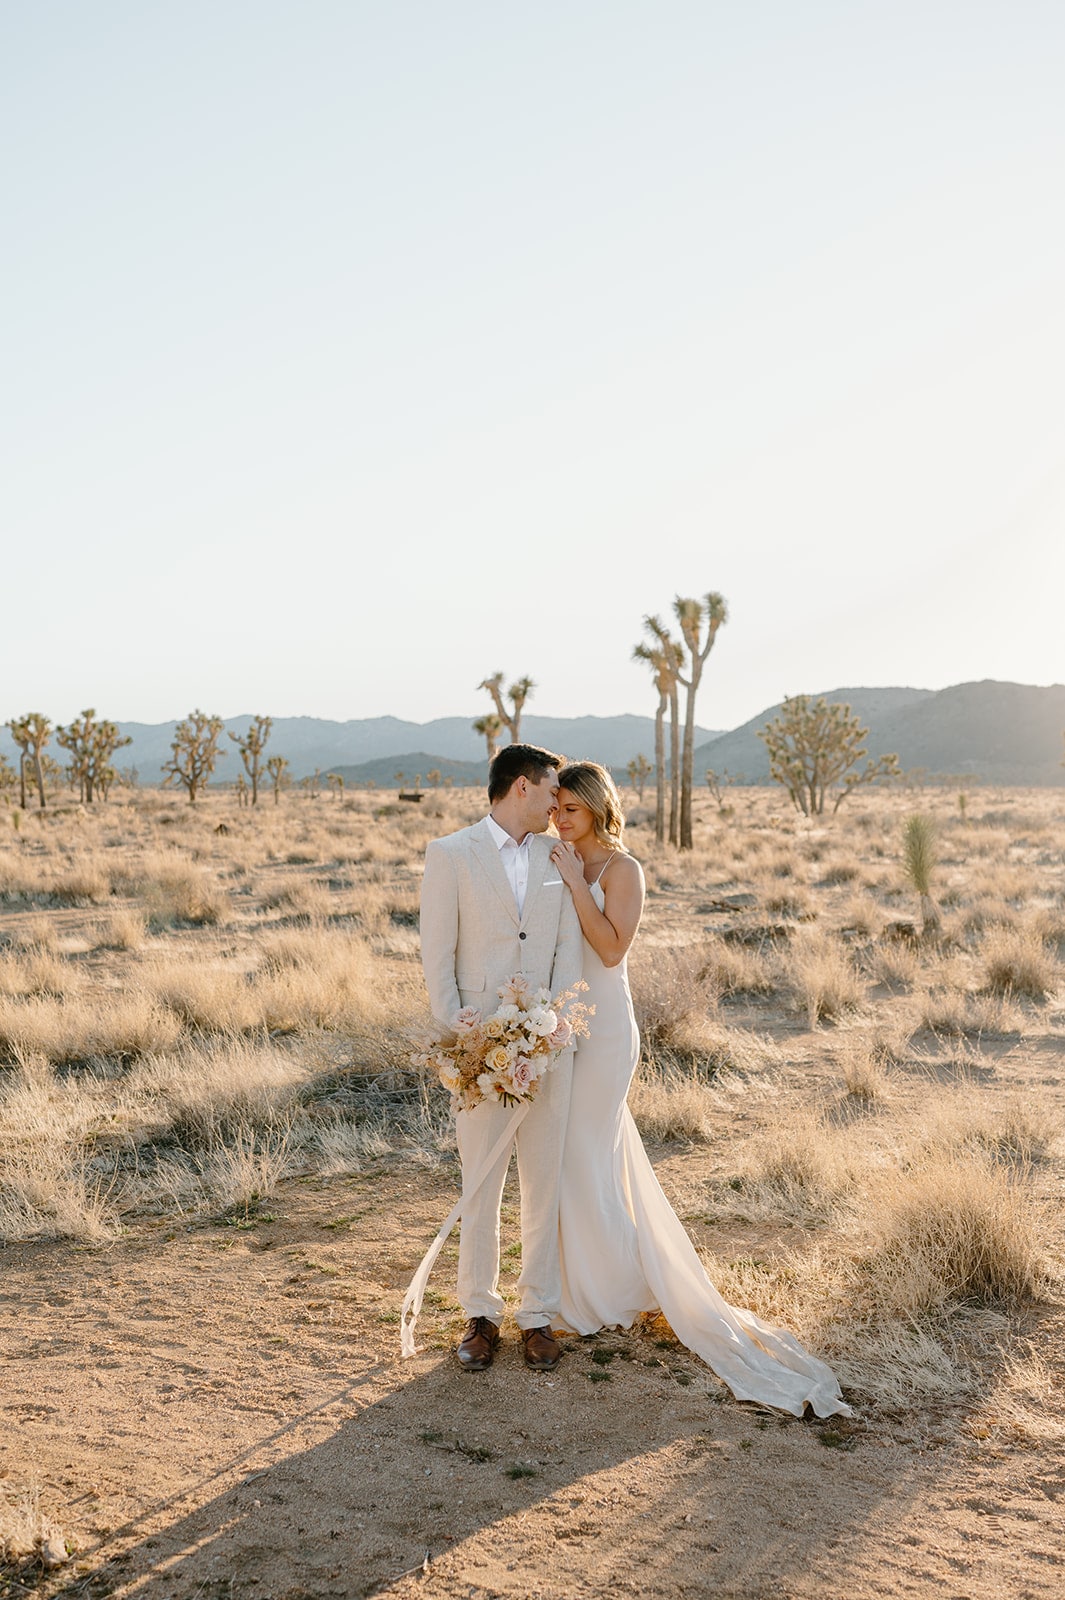 A couple in wedding attire are seen in Joshua Tree National park practicing leave no trace principles